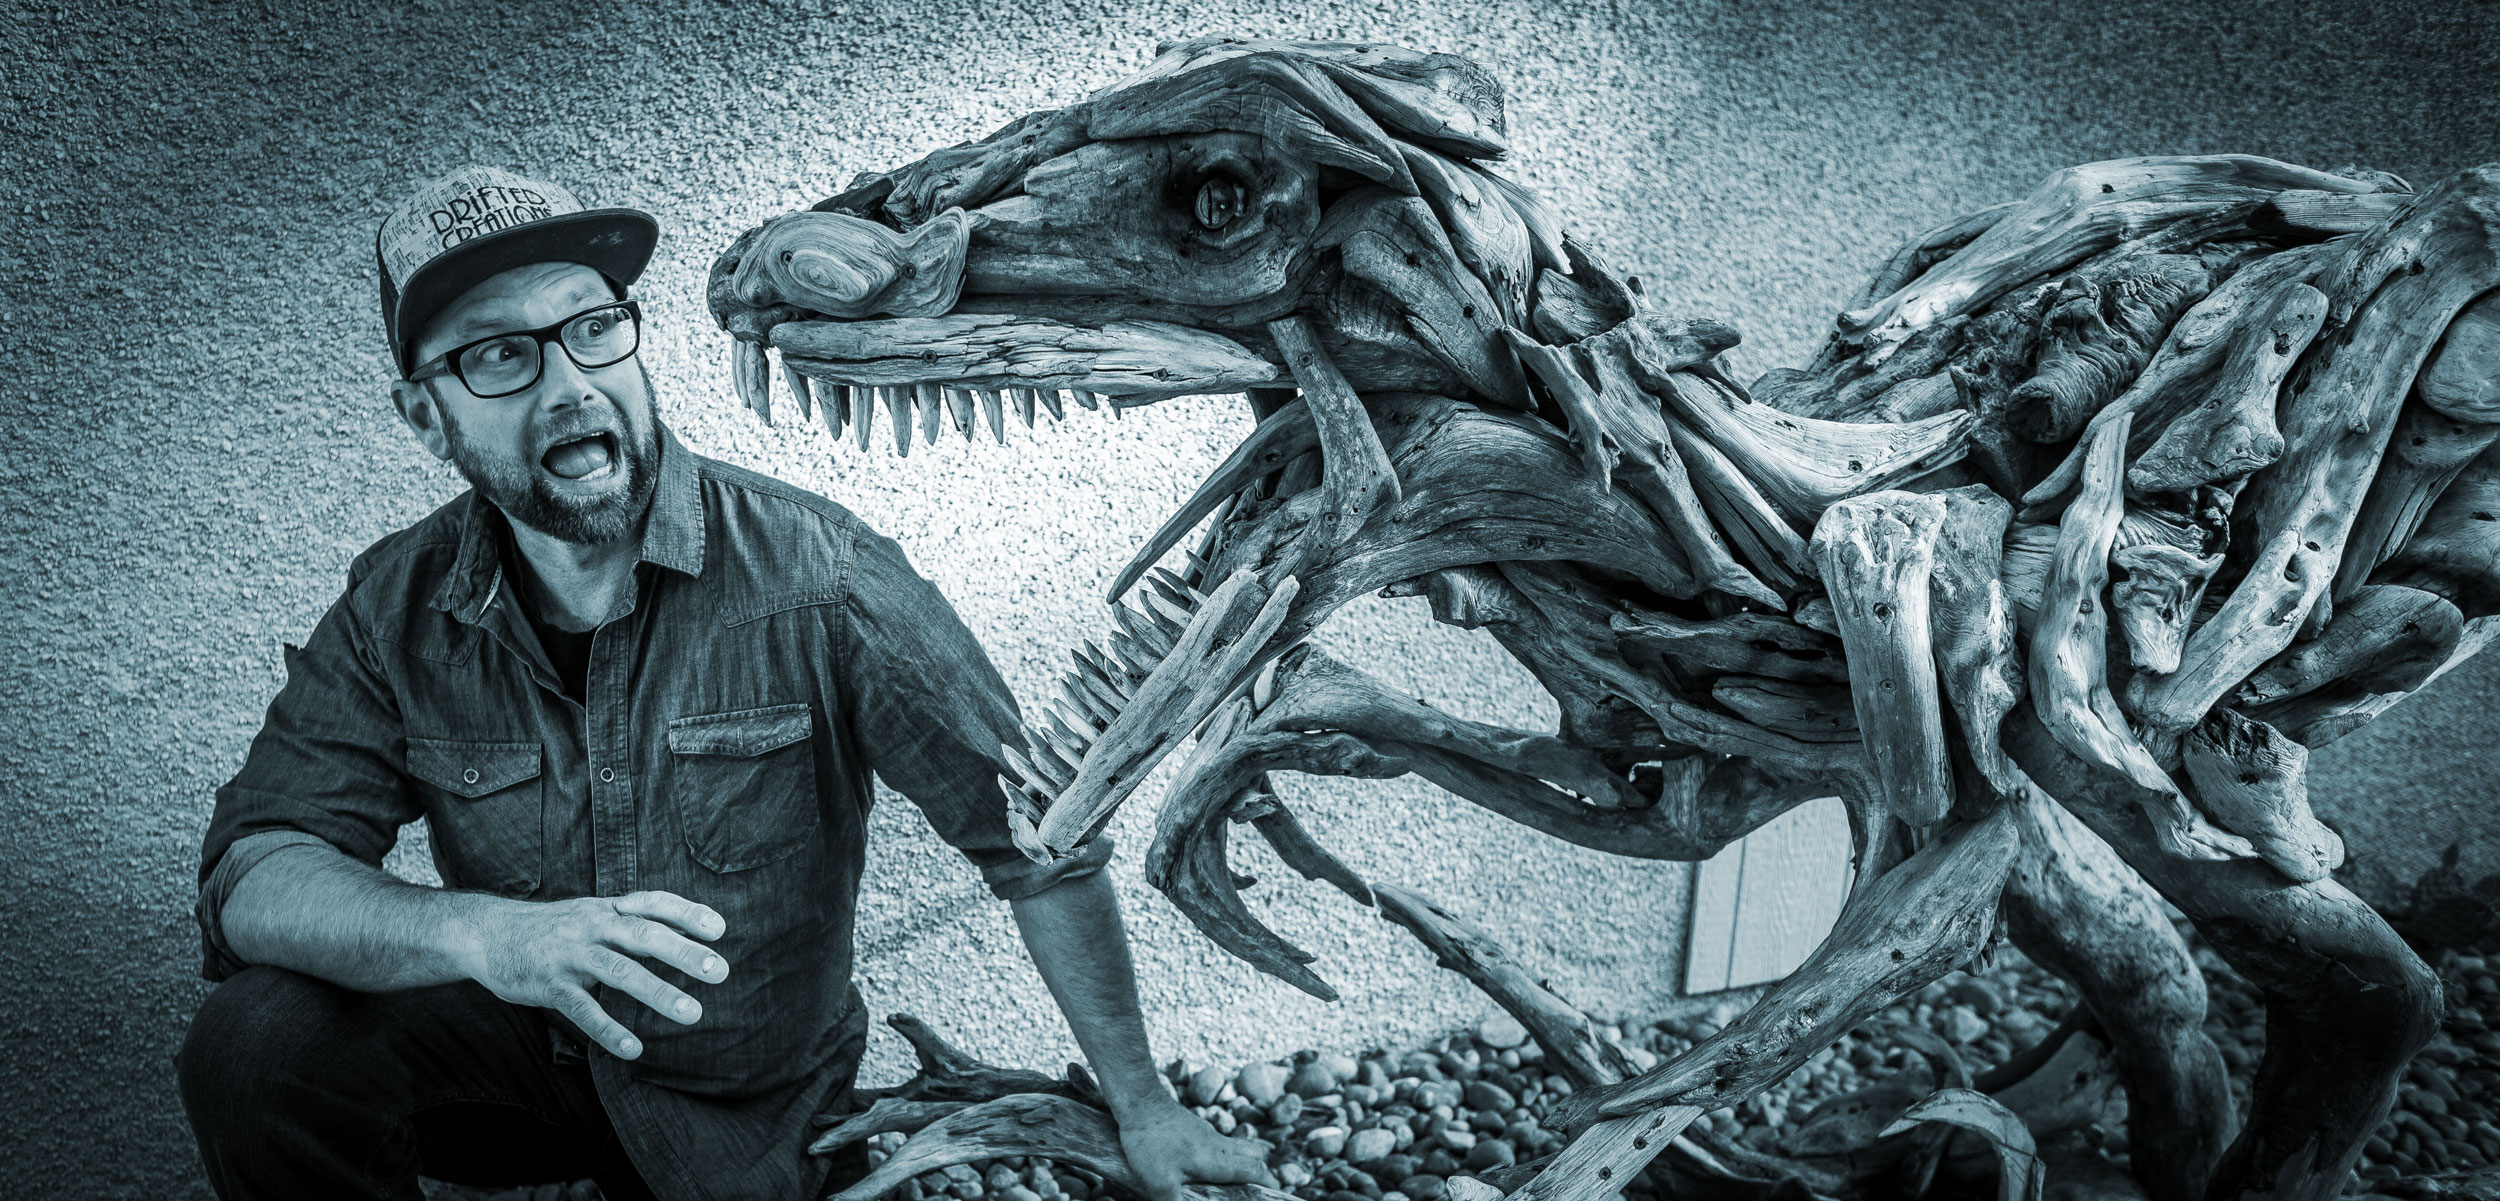 Driftwood artist Alex Witcombe poses with a Velociraptor sculpture